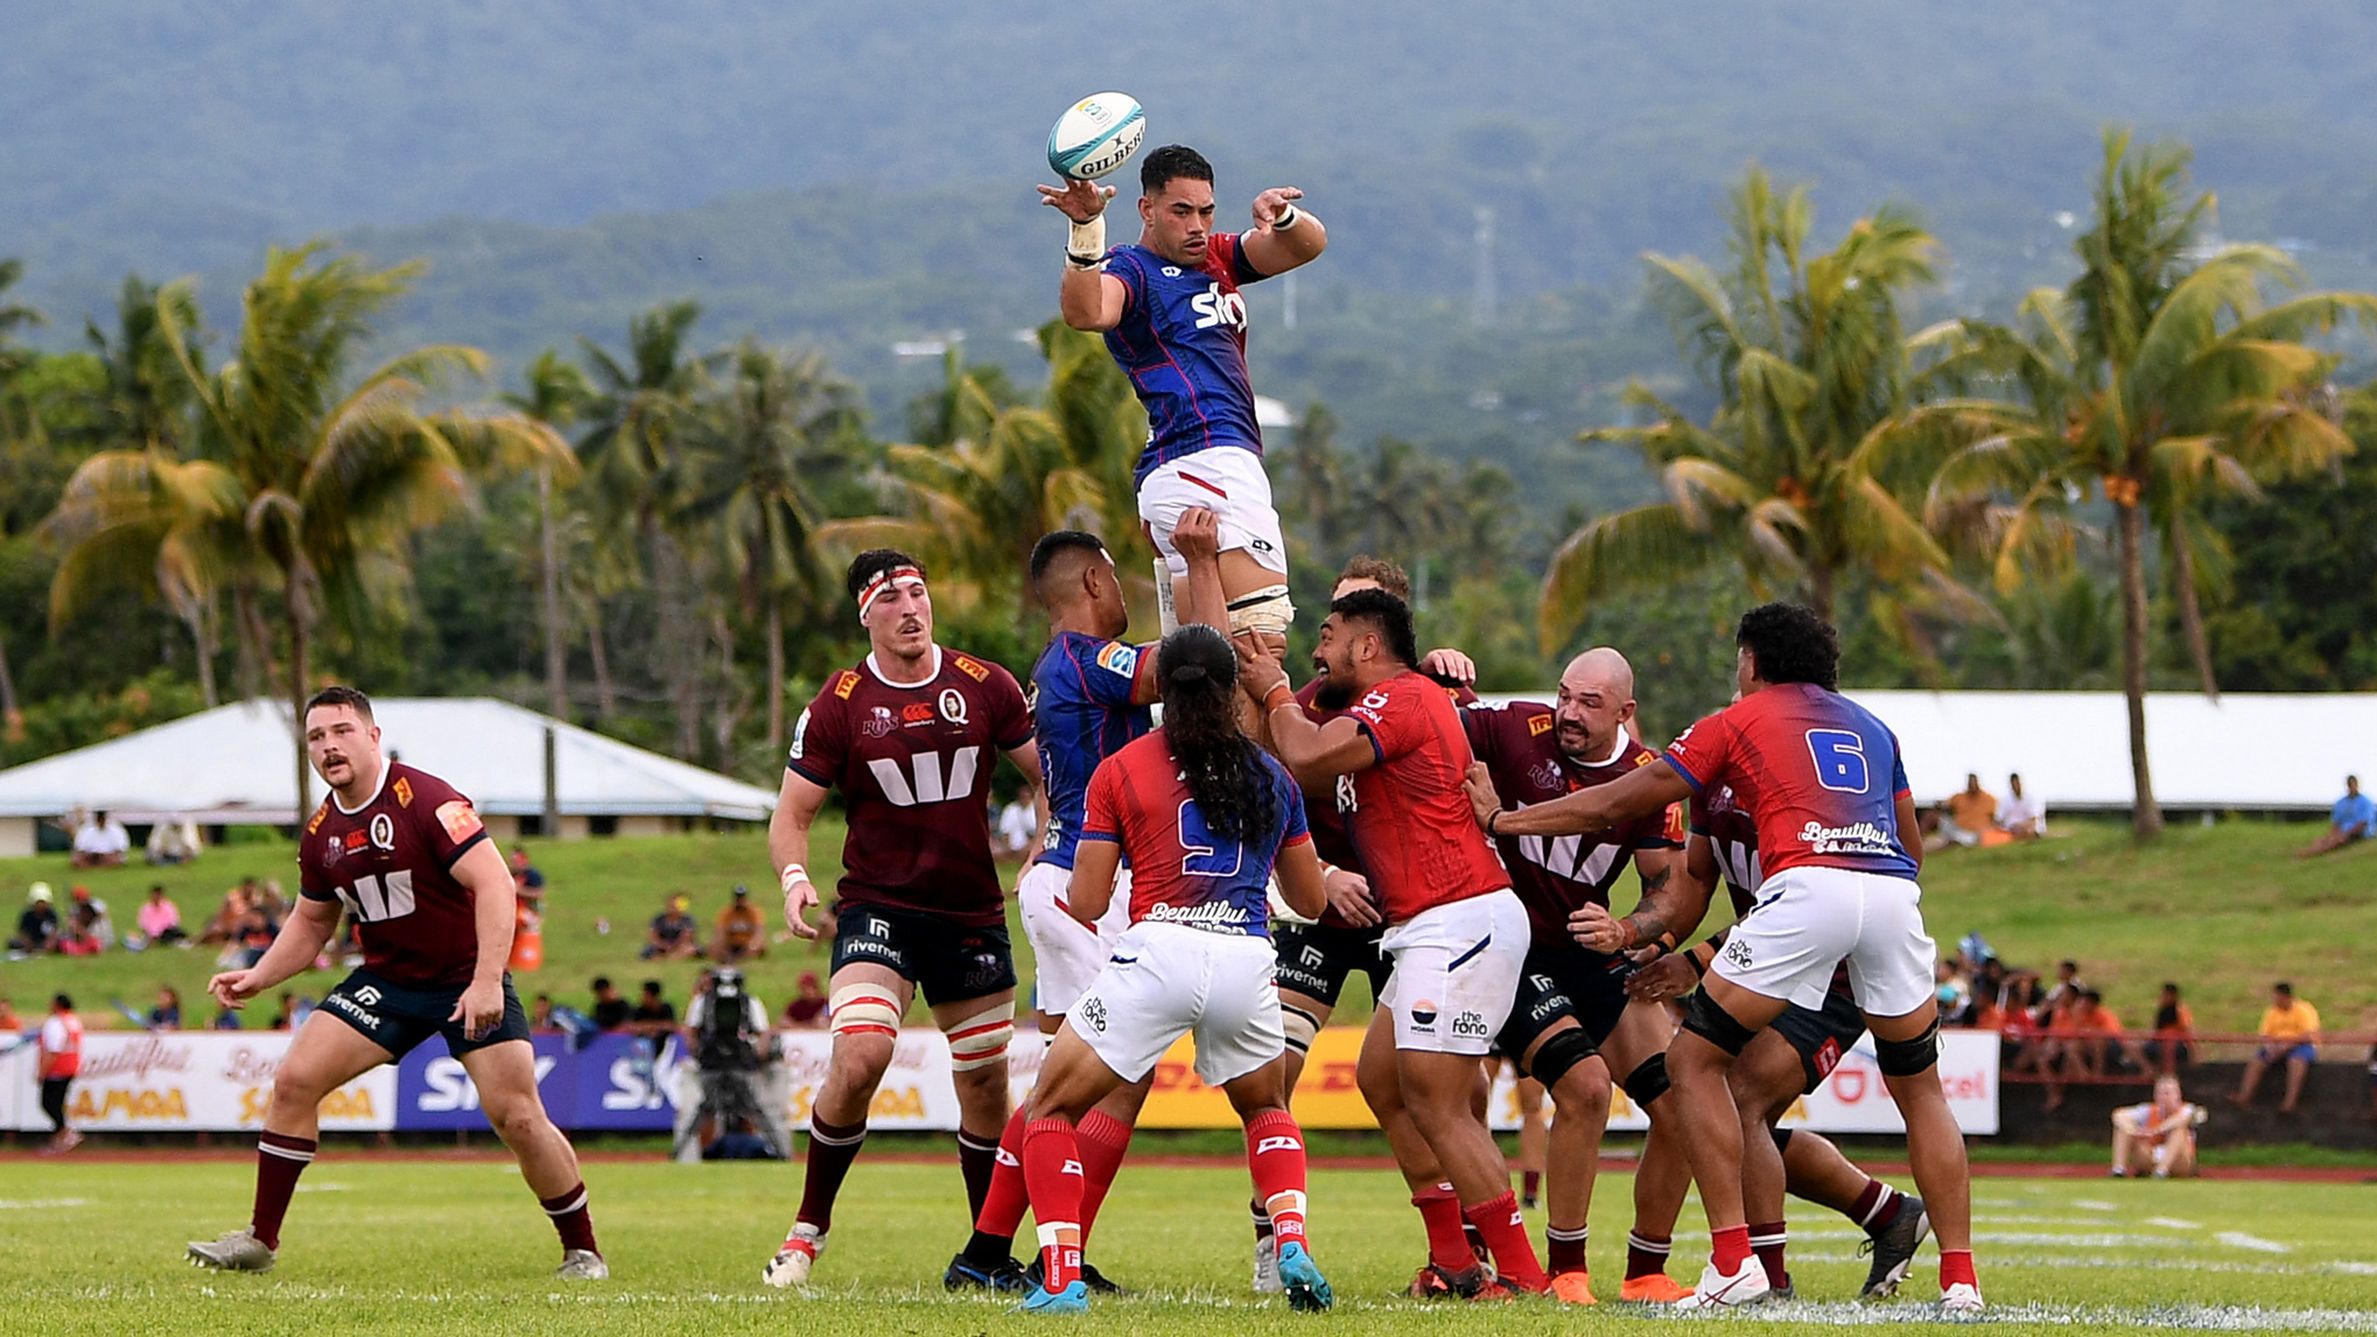 Potu Leavasa of Moana Pasifika collects the ball from a lineout during the round eight Super Rugby Pacific match between Moana Pasifika and Queensland Reds at Apia Park National Stadium.